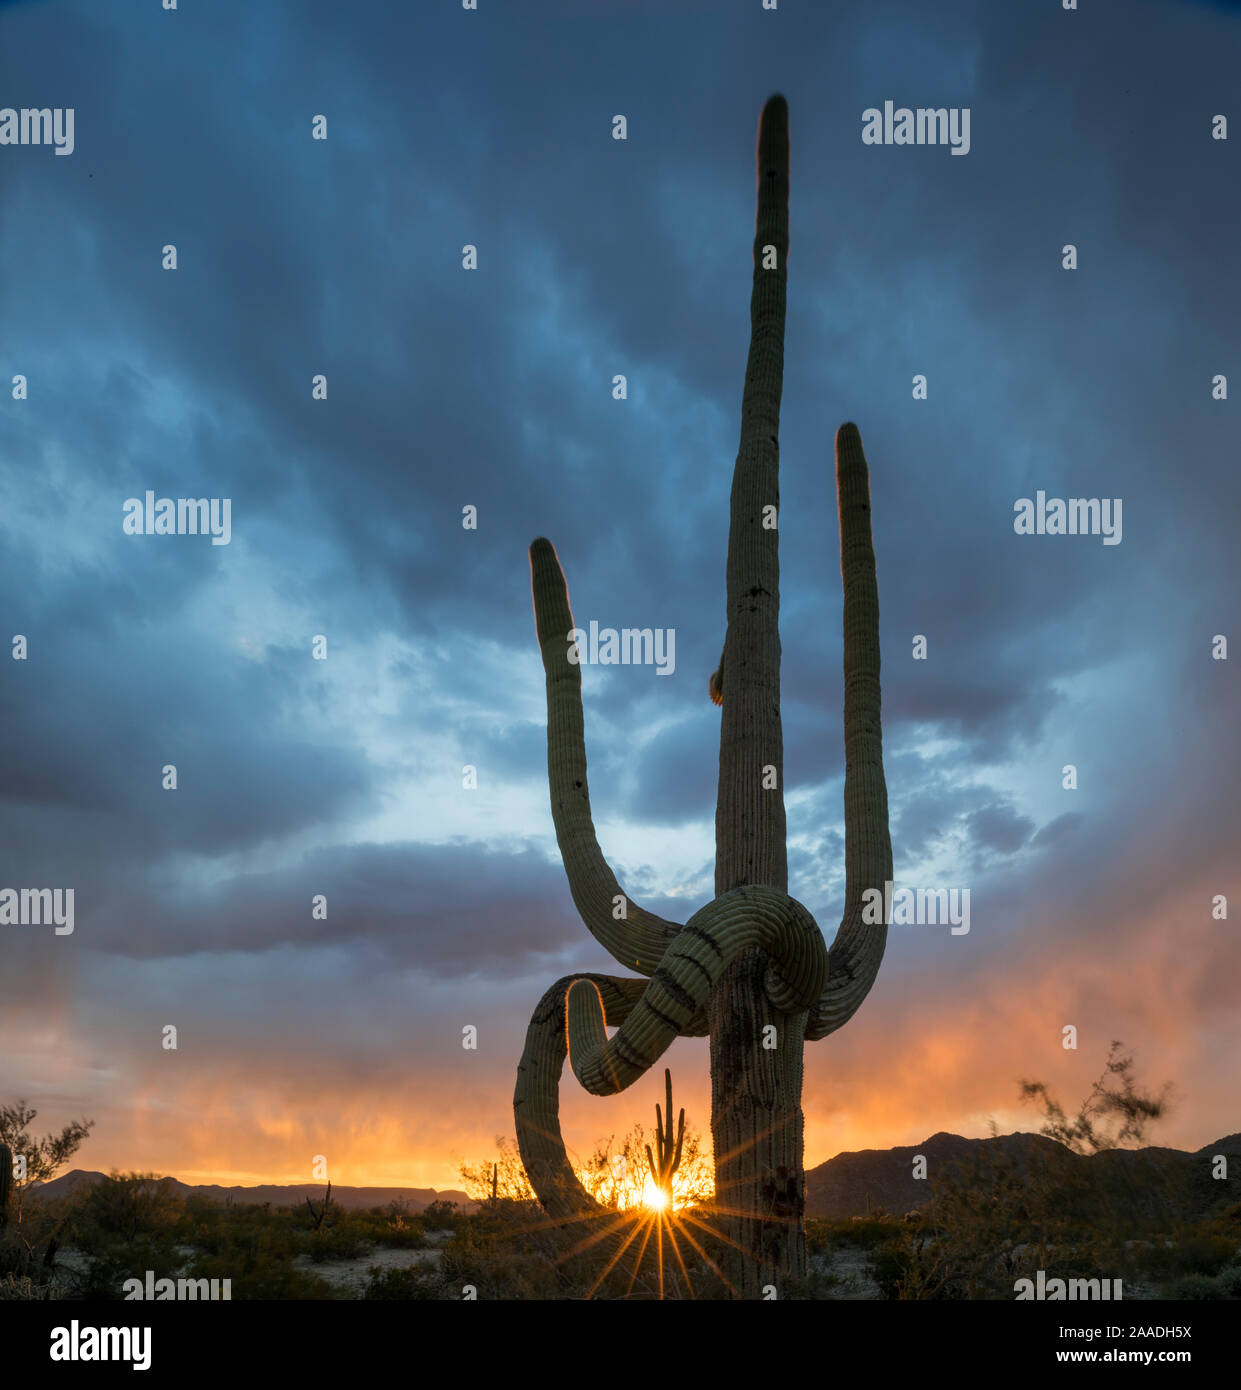 ARCHIVED SG - Duplicate 10/10/2017.   Saguaro cactus (Carnegiea gigantea) at sunset, with drooping frost damaged limbs, South Maricopa Mountains Wilderness, Sonoran Desert National Monument, Arizona, USA, March. Stock Photo